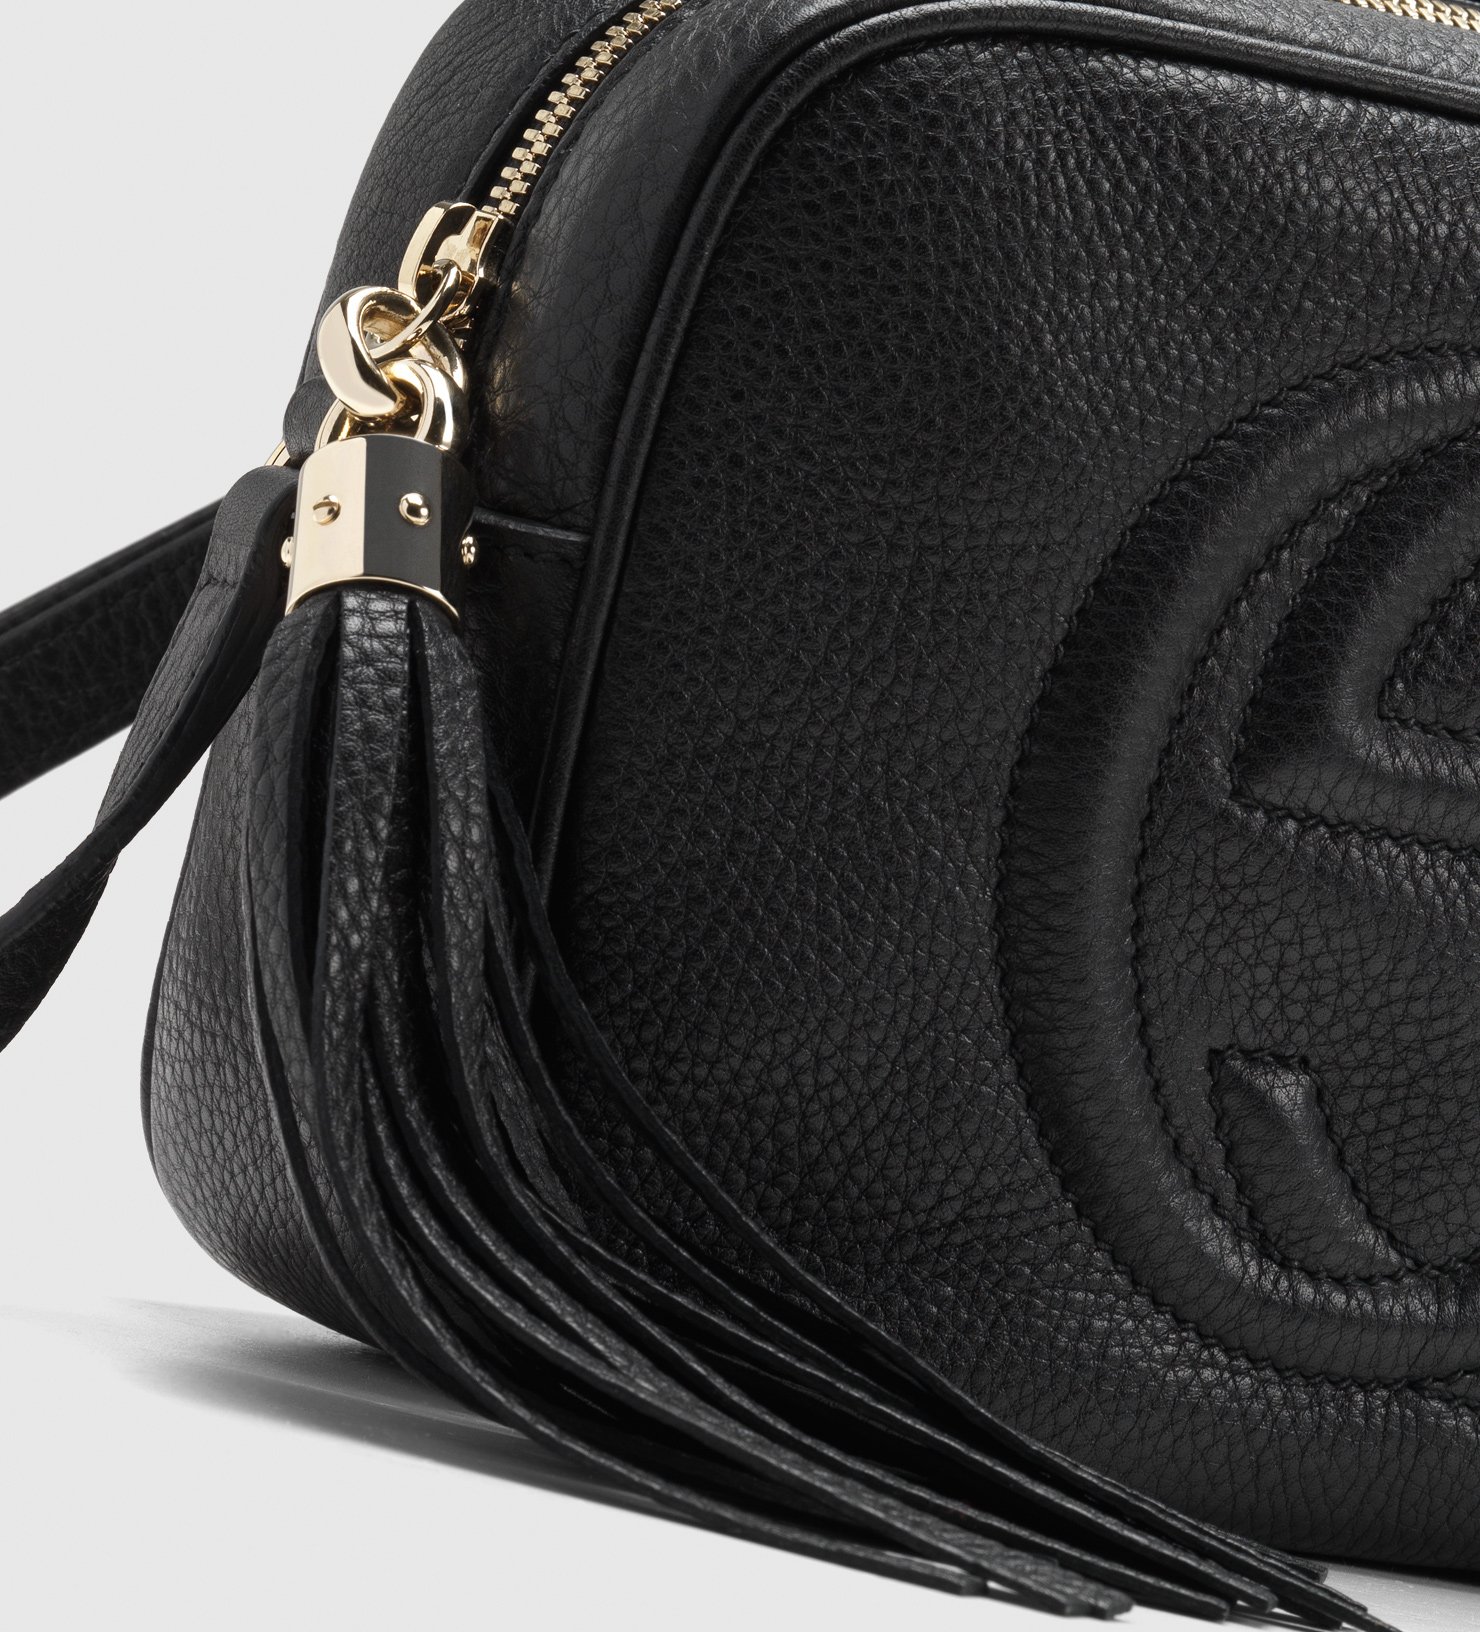 Gucci Soho Leather Disco Bag in Black - Lyst